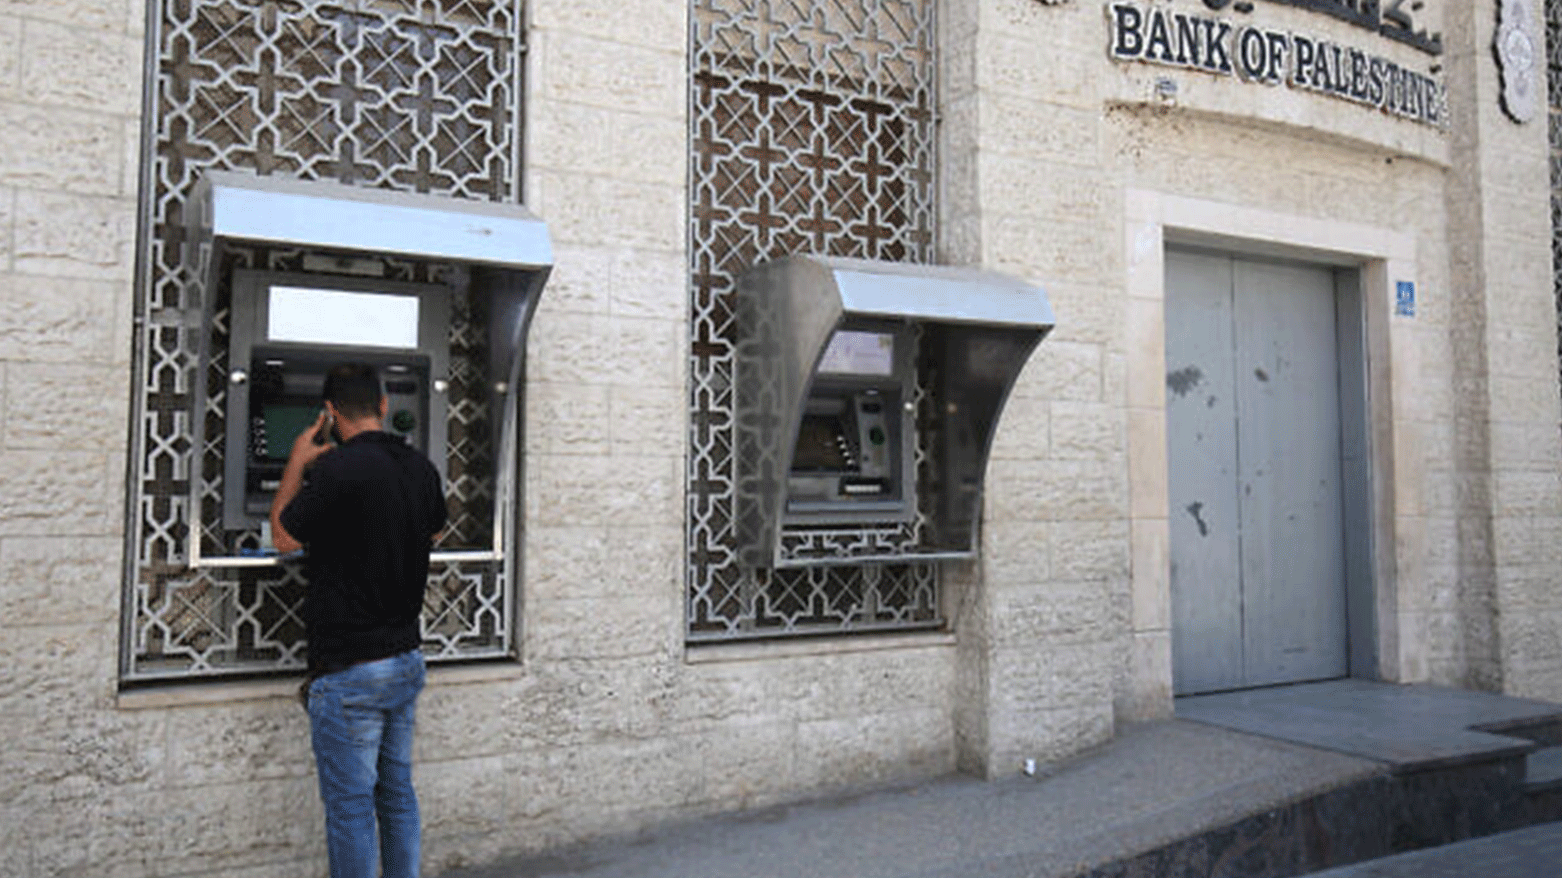 Armed groups in Gaza rob Bank of Palestine branches report